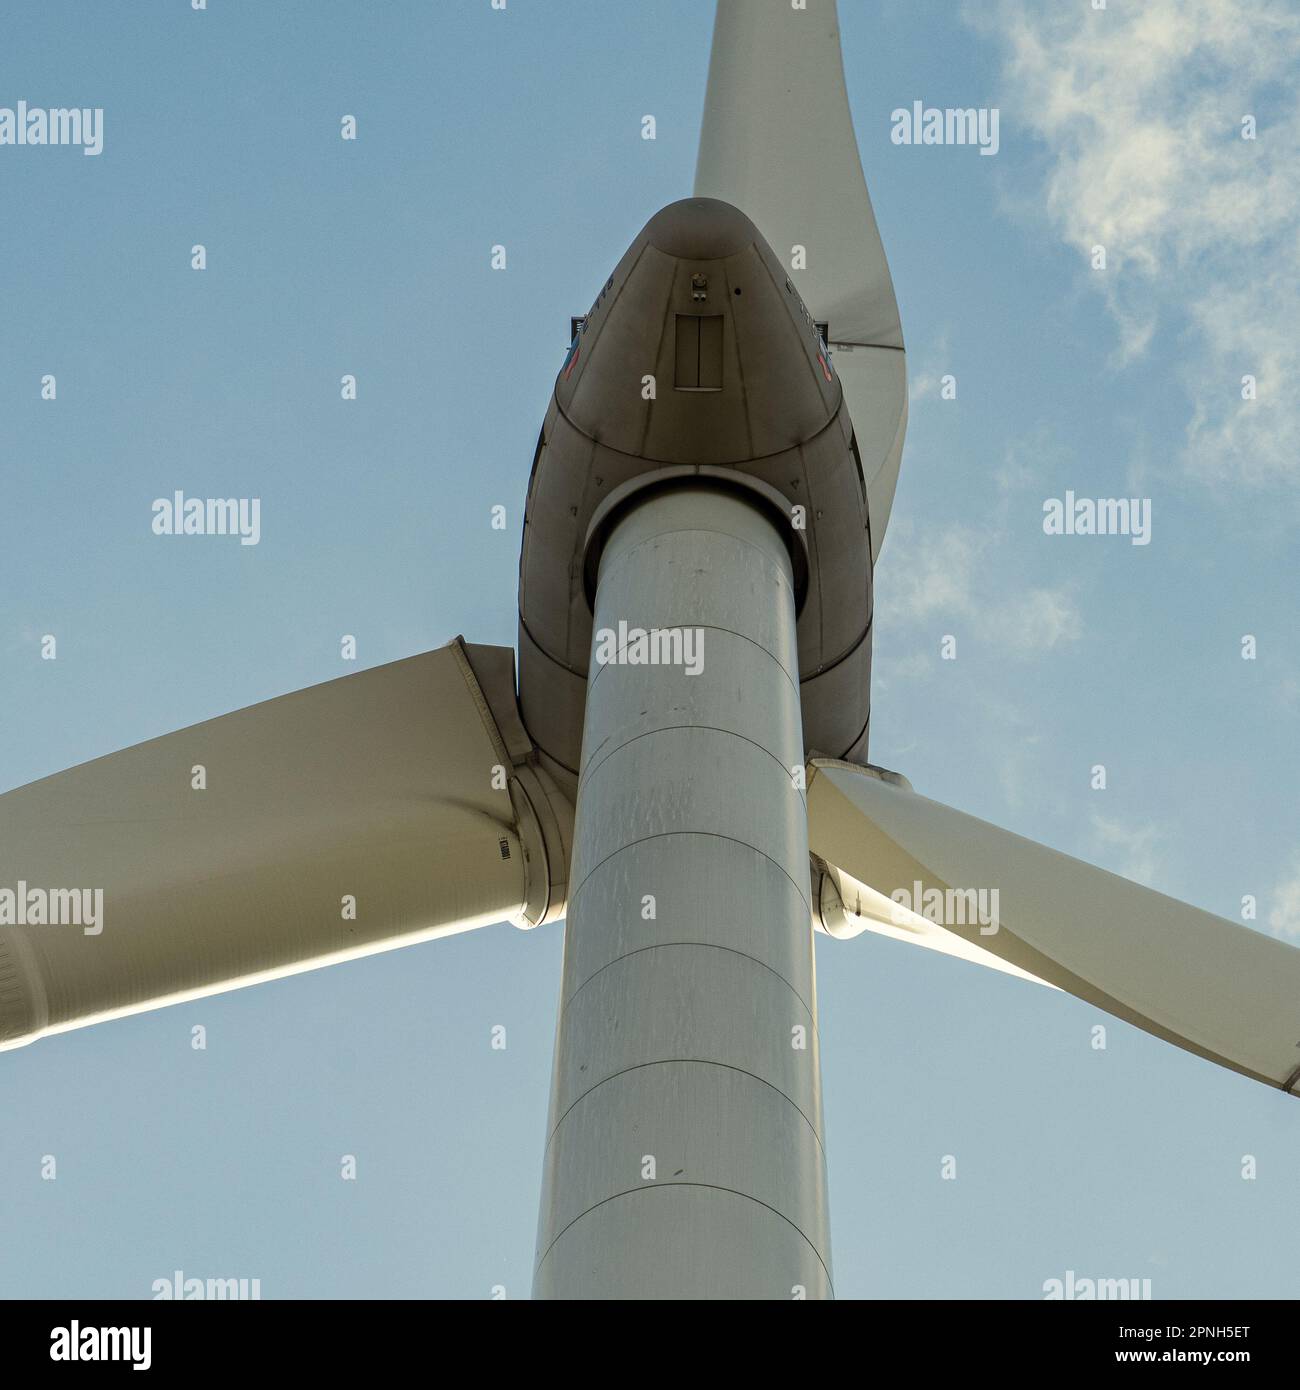 'Renewable energy in sight: The majestic wind turbine towering over the landscape, providing clean energy for a more sustainable future.' Stock Photo